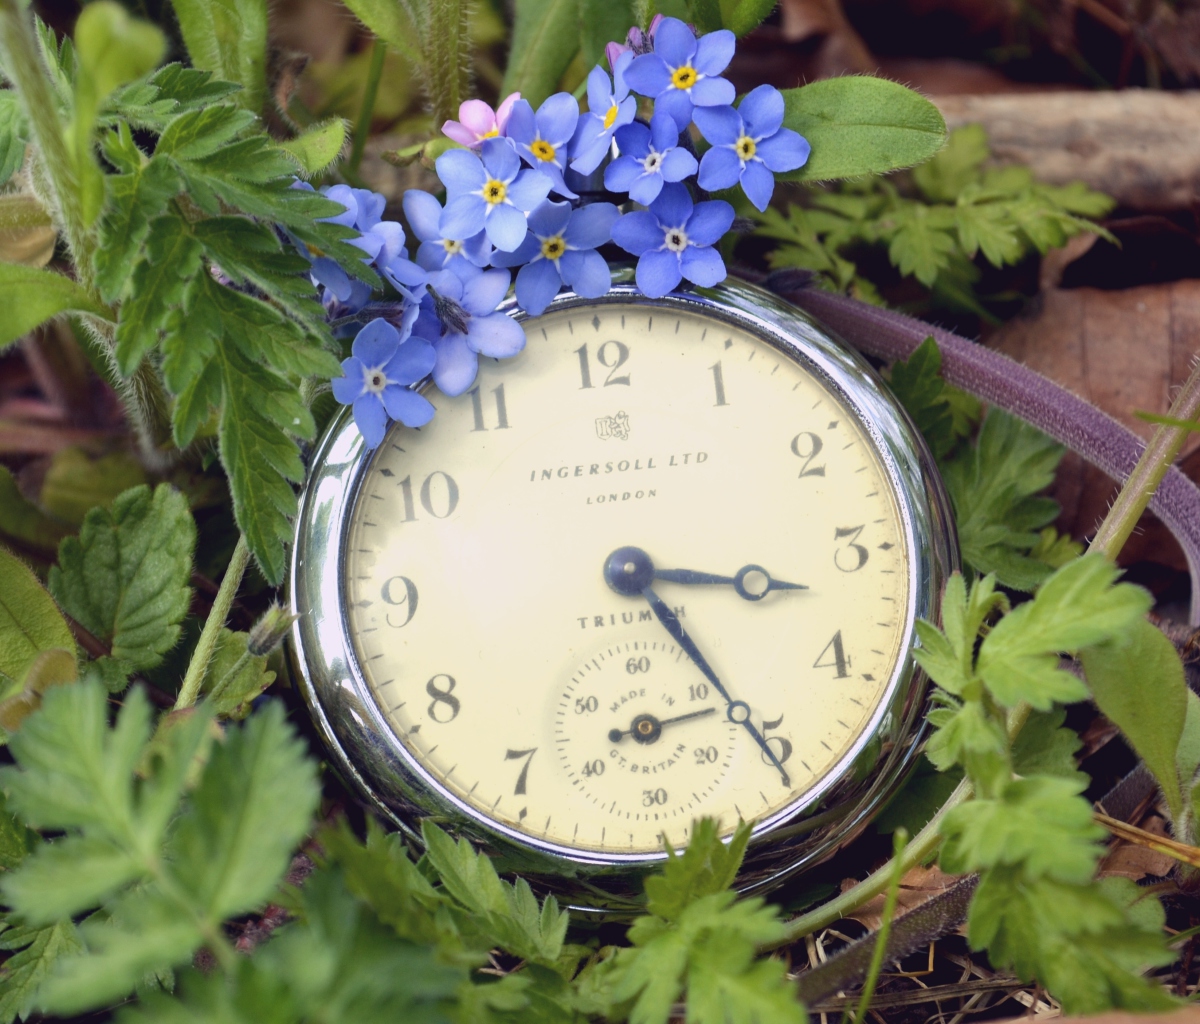 Vintage Watch And Little Blue Flowers wallpaper 1200x1024